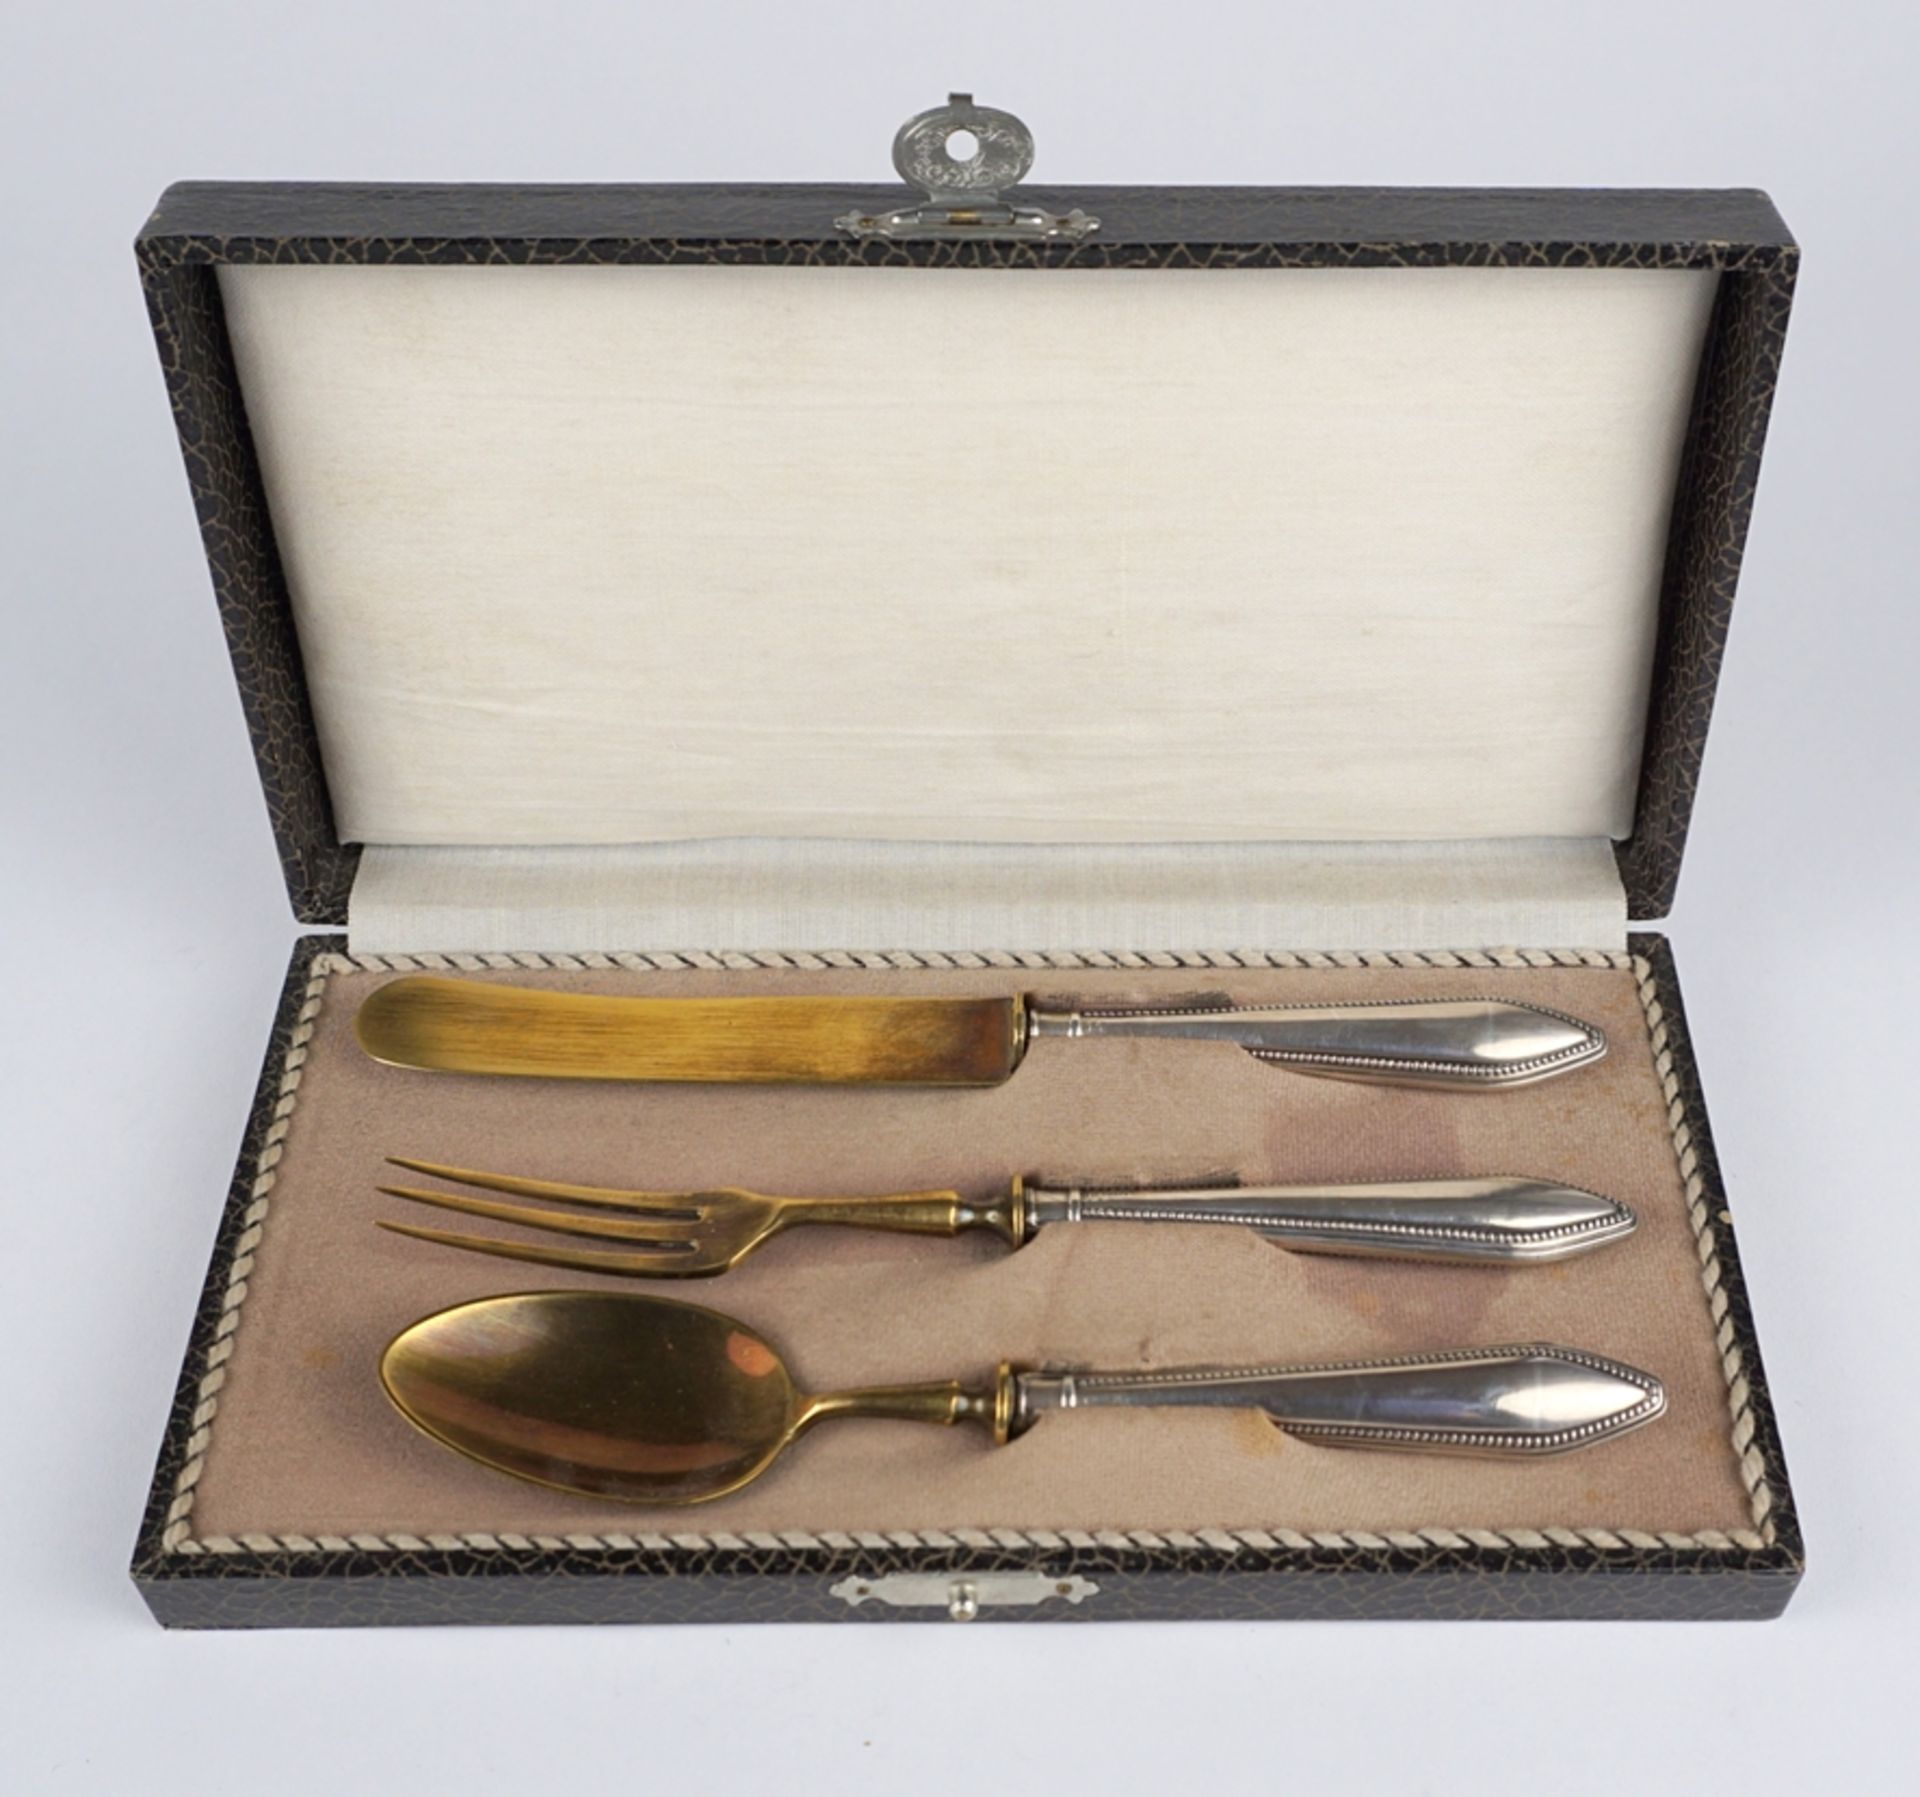 3-piece cutlery set, silver/brass, early 20th c. - Image 2 of 2